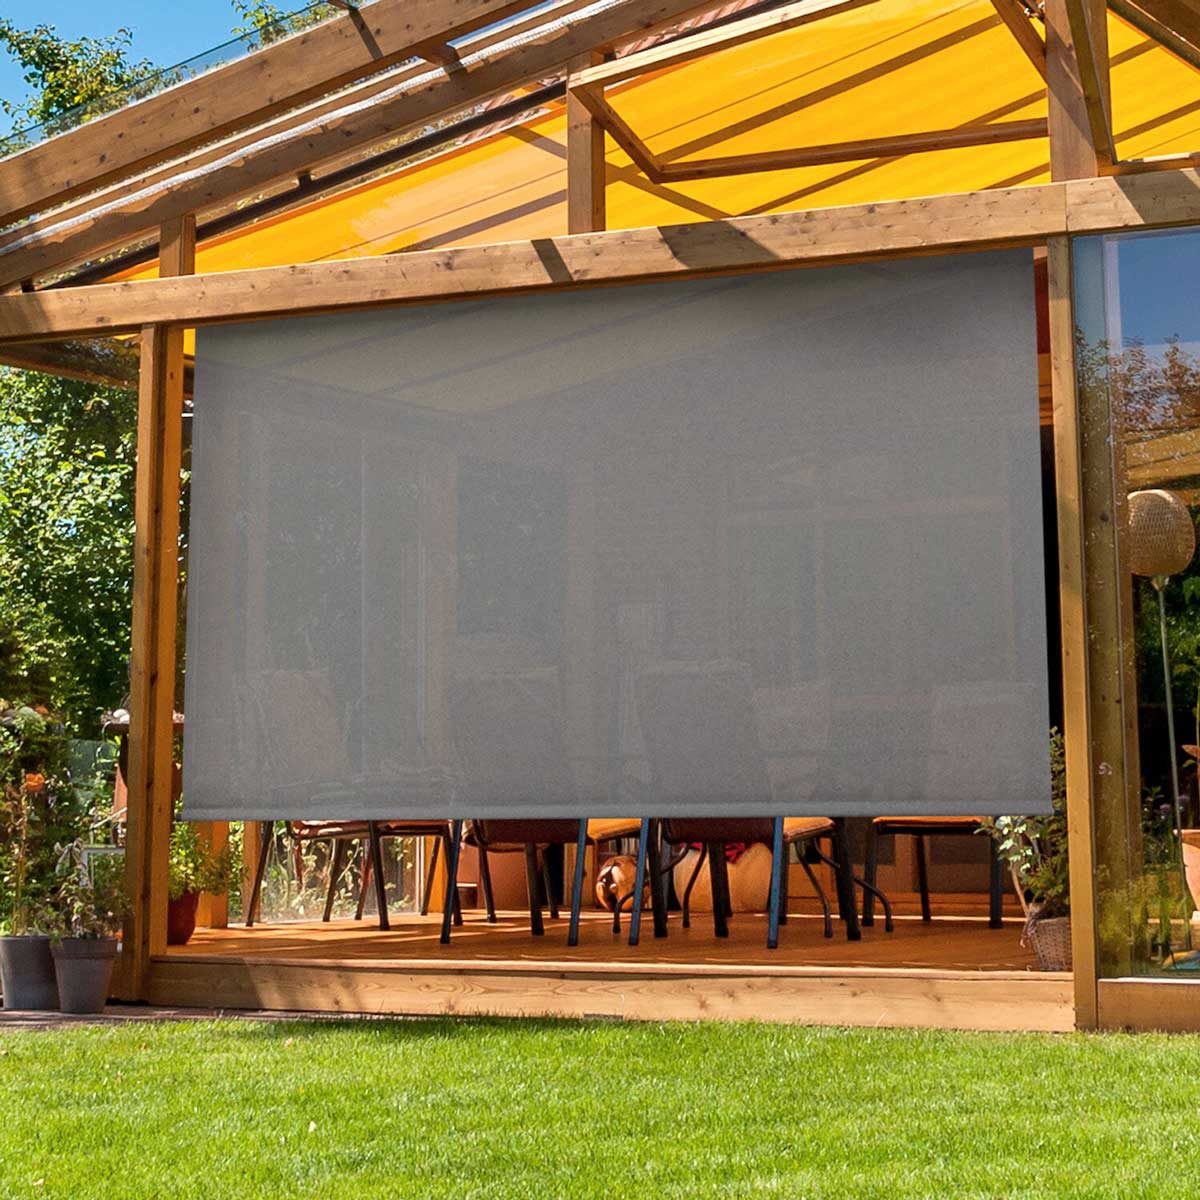 10 Best Outdoor Blinds The Family, Large Outdoor Bamboo Shades For Patio